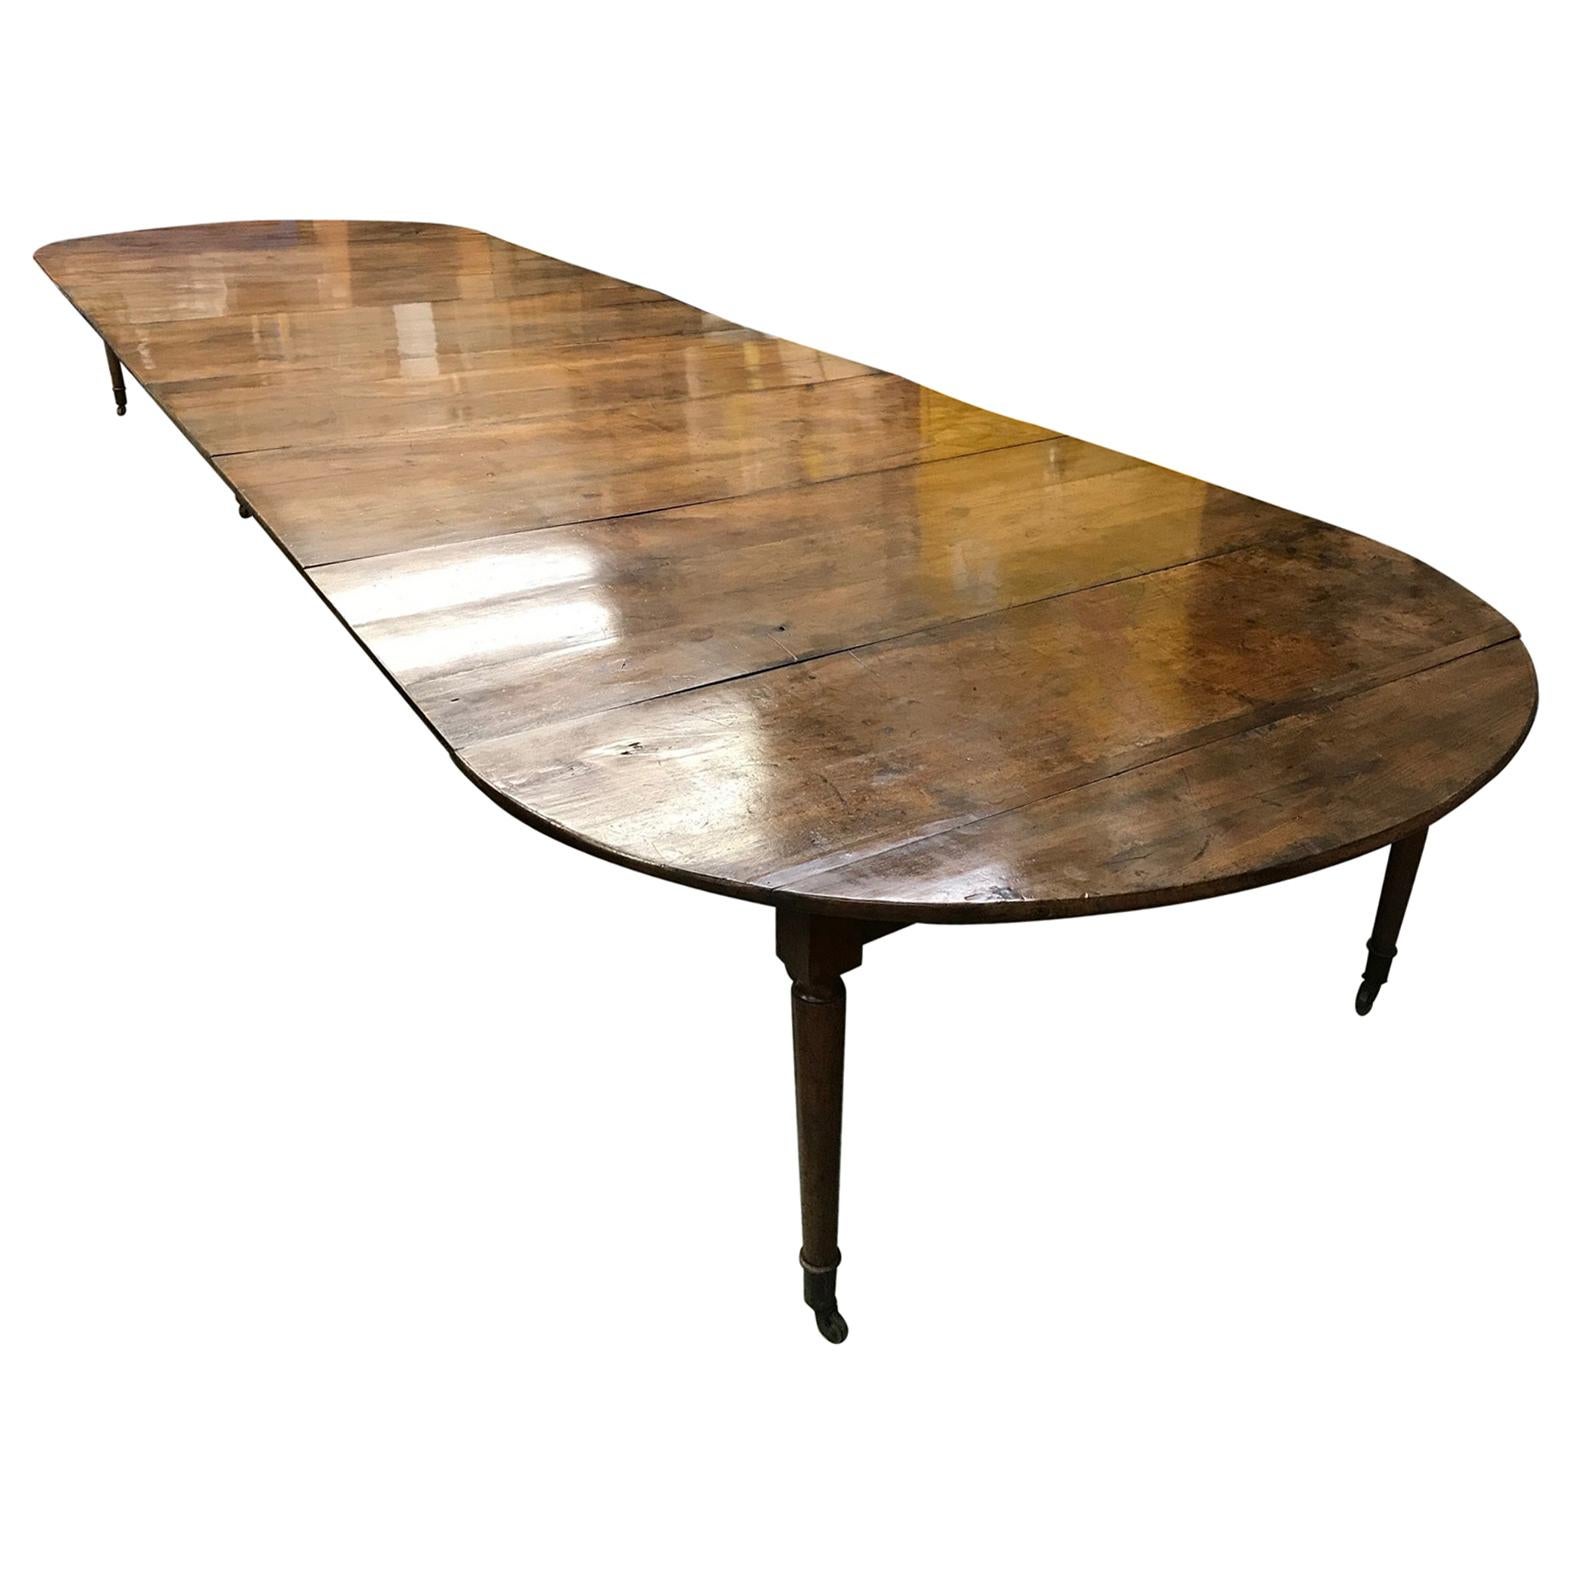 Solid Walnut Extending Dining Table, France, First Half of the 19th Century